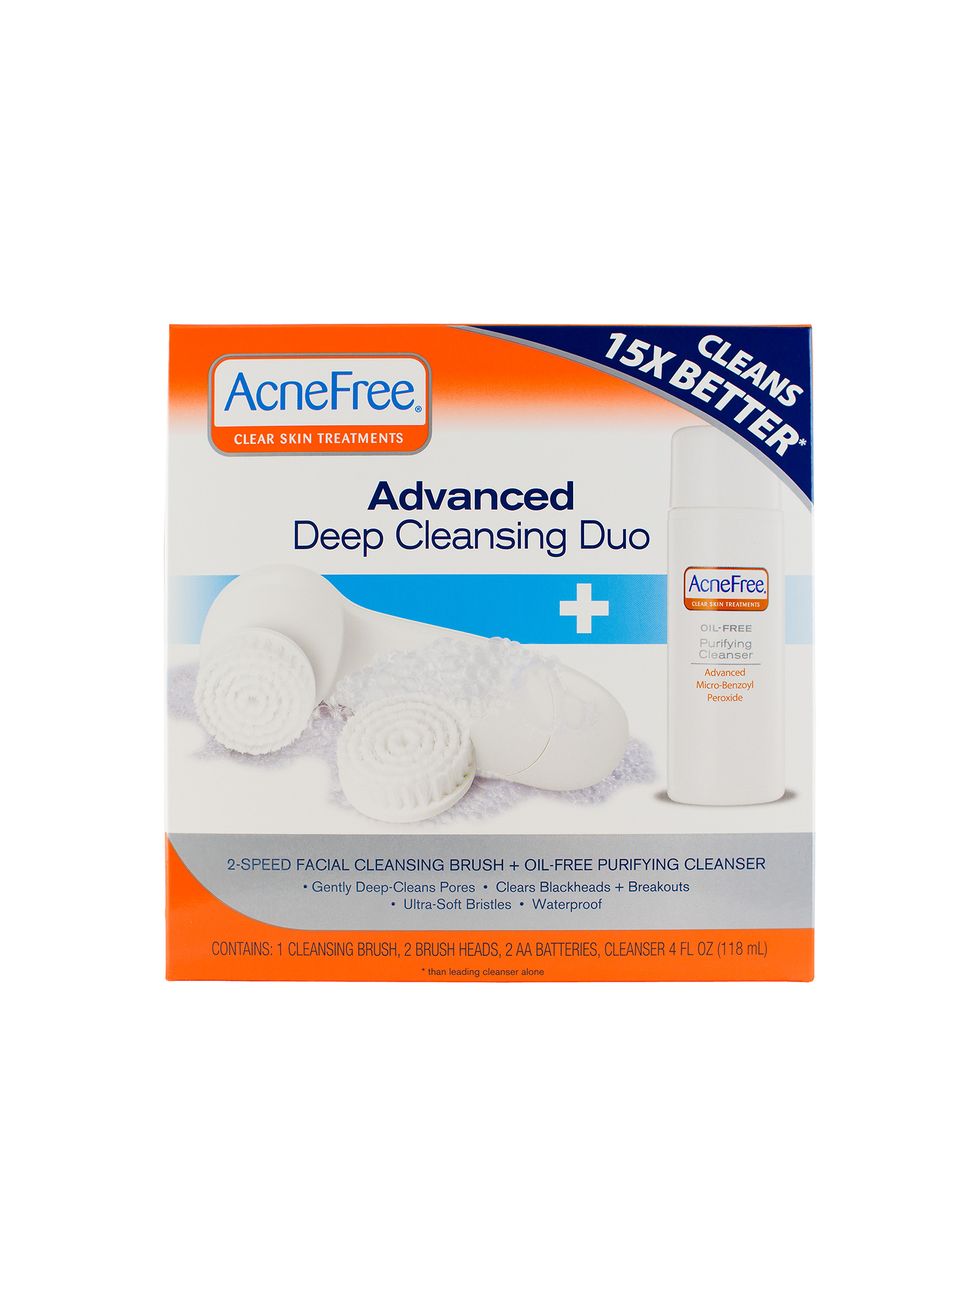 AcneFree Advanced Deep Cleansing Duo